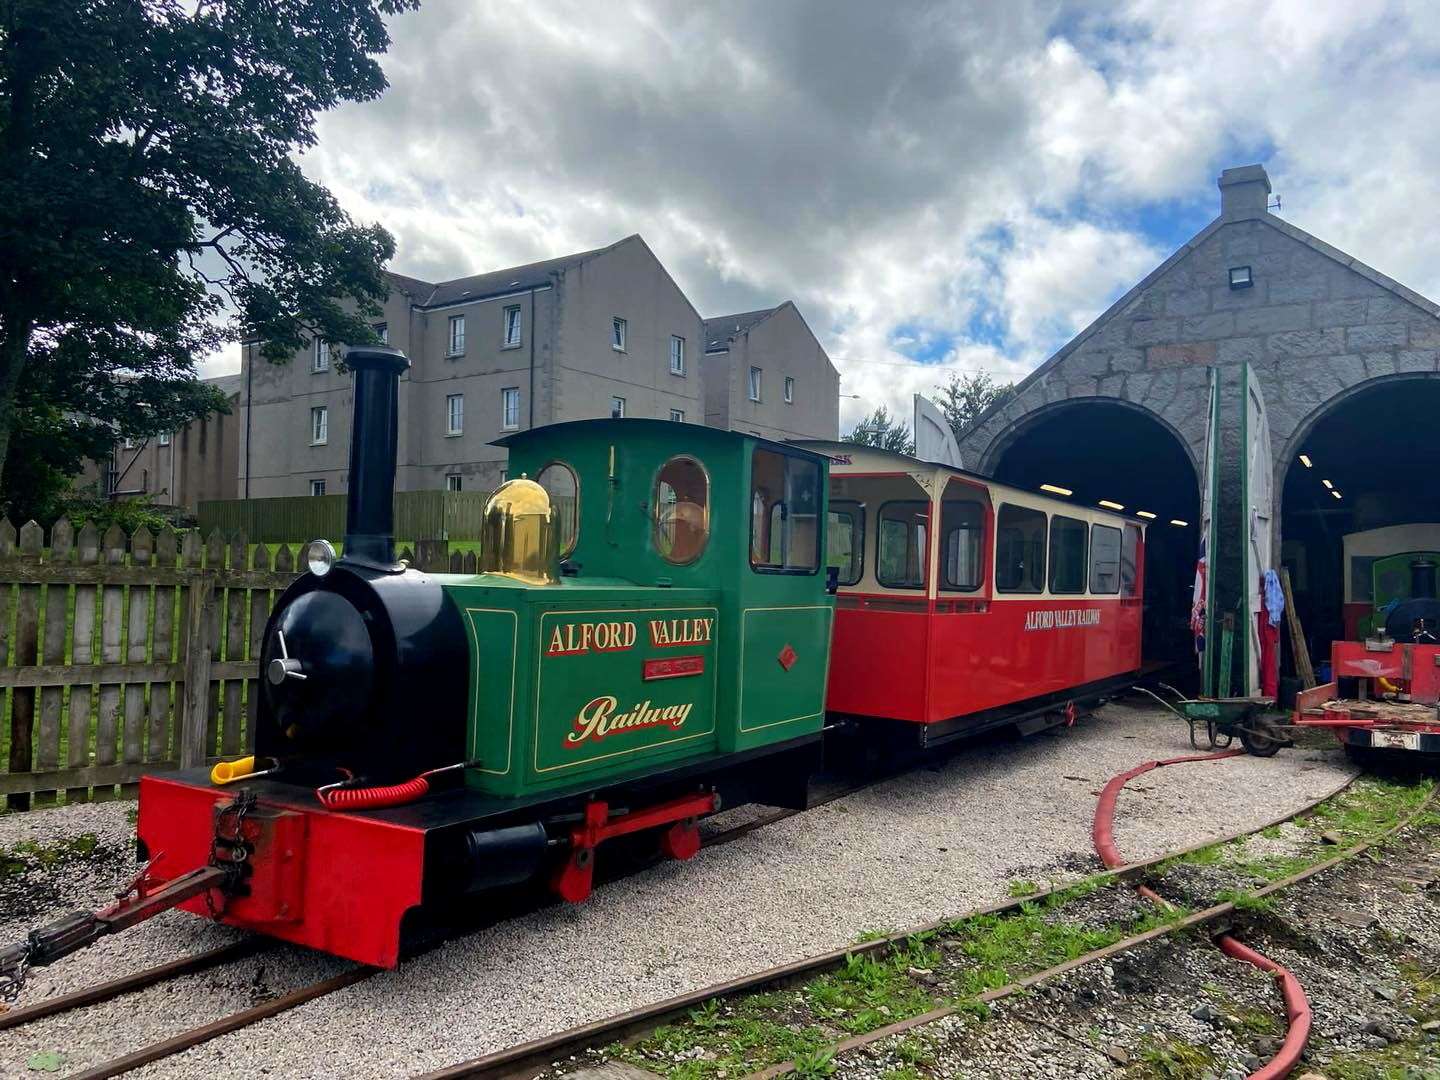 The Alford Valley Community Railway returns to action this weekend.